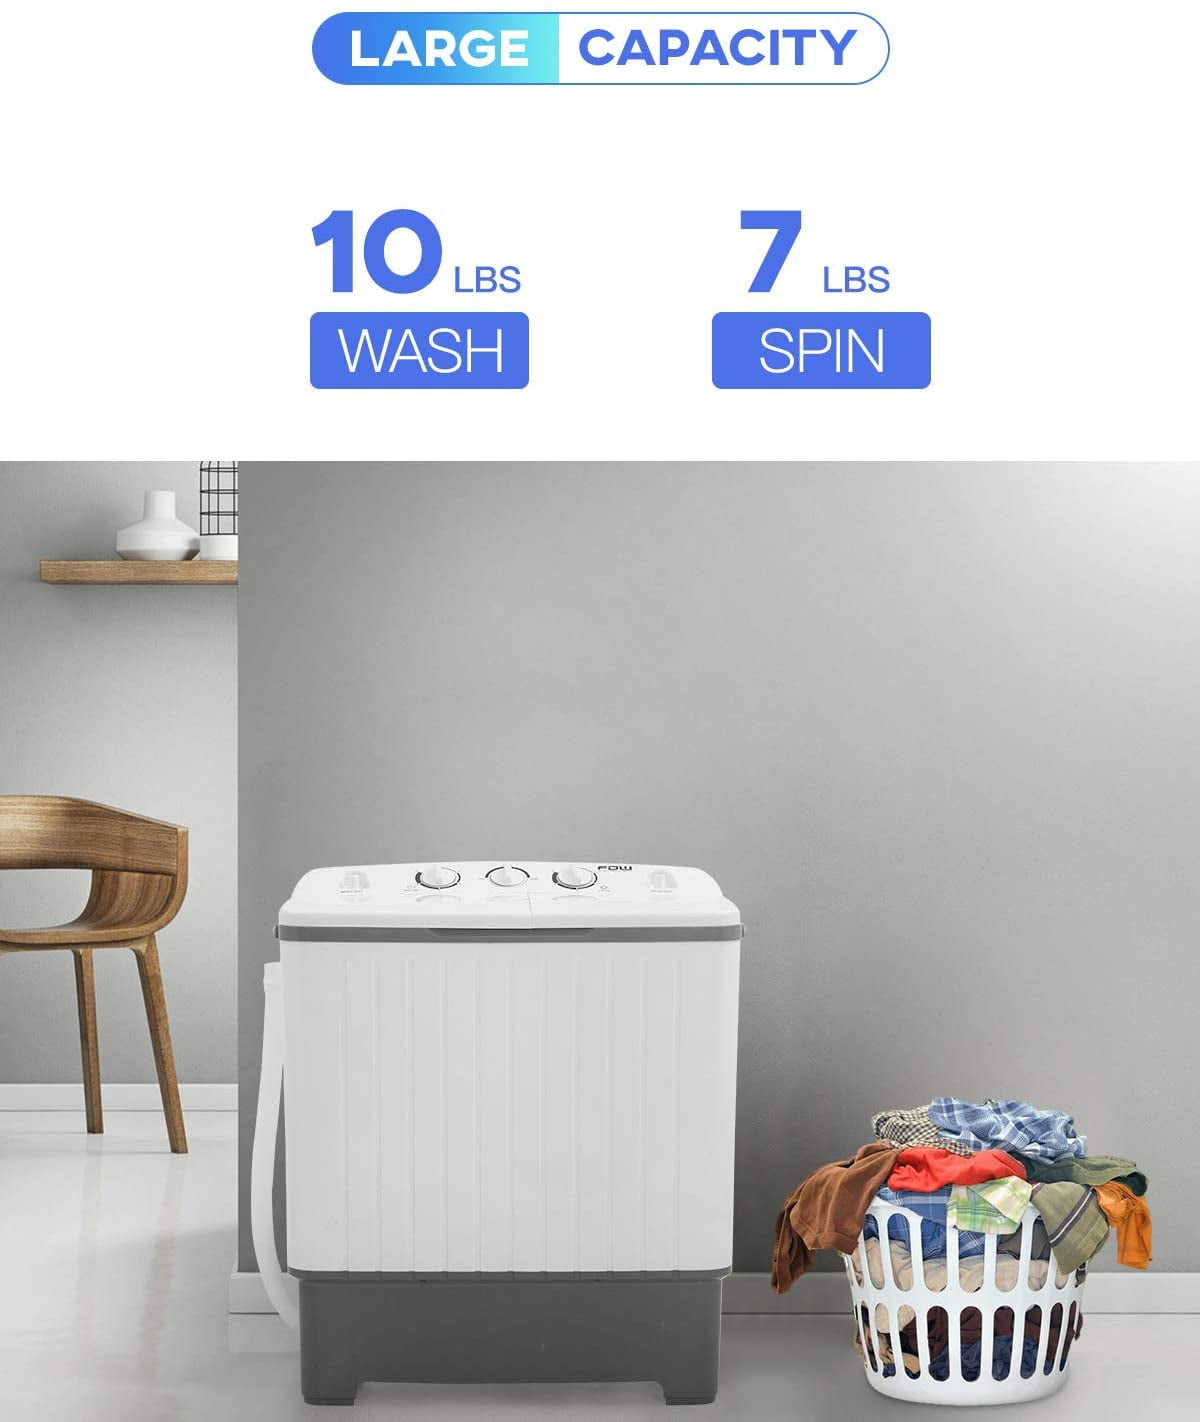 Hommoo Hommoo Portable Compact Washer Spinner Mini Twin Tub Washing Machine w/Wash and Spin Cycle 10.4 lbs Capacity 